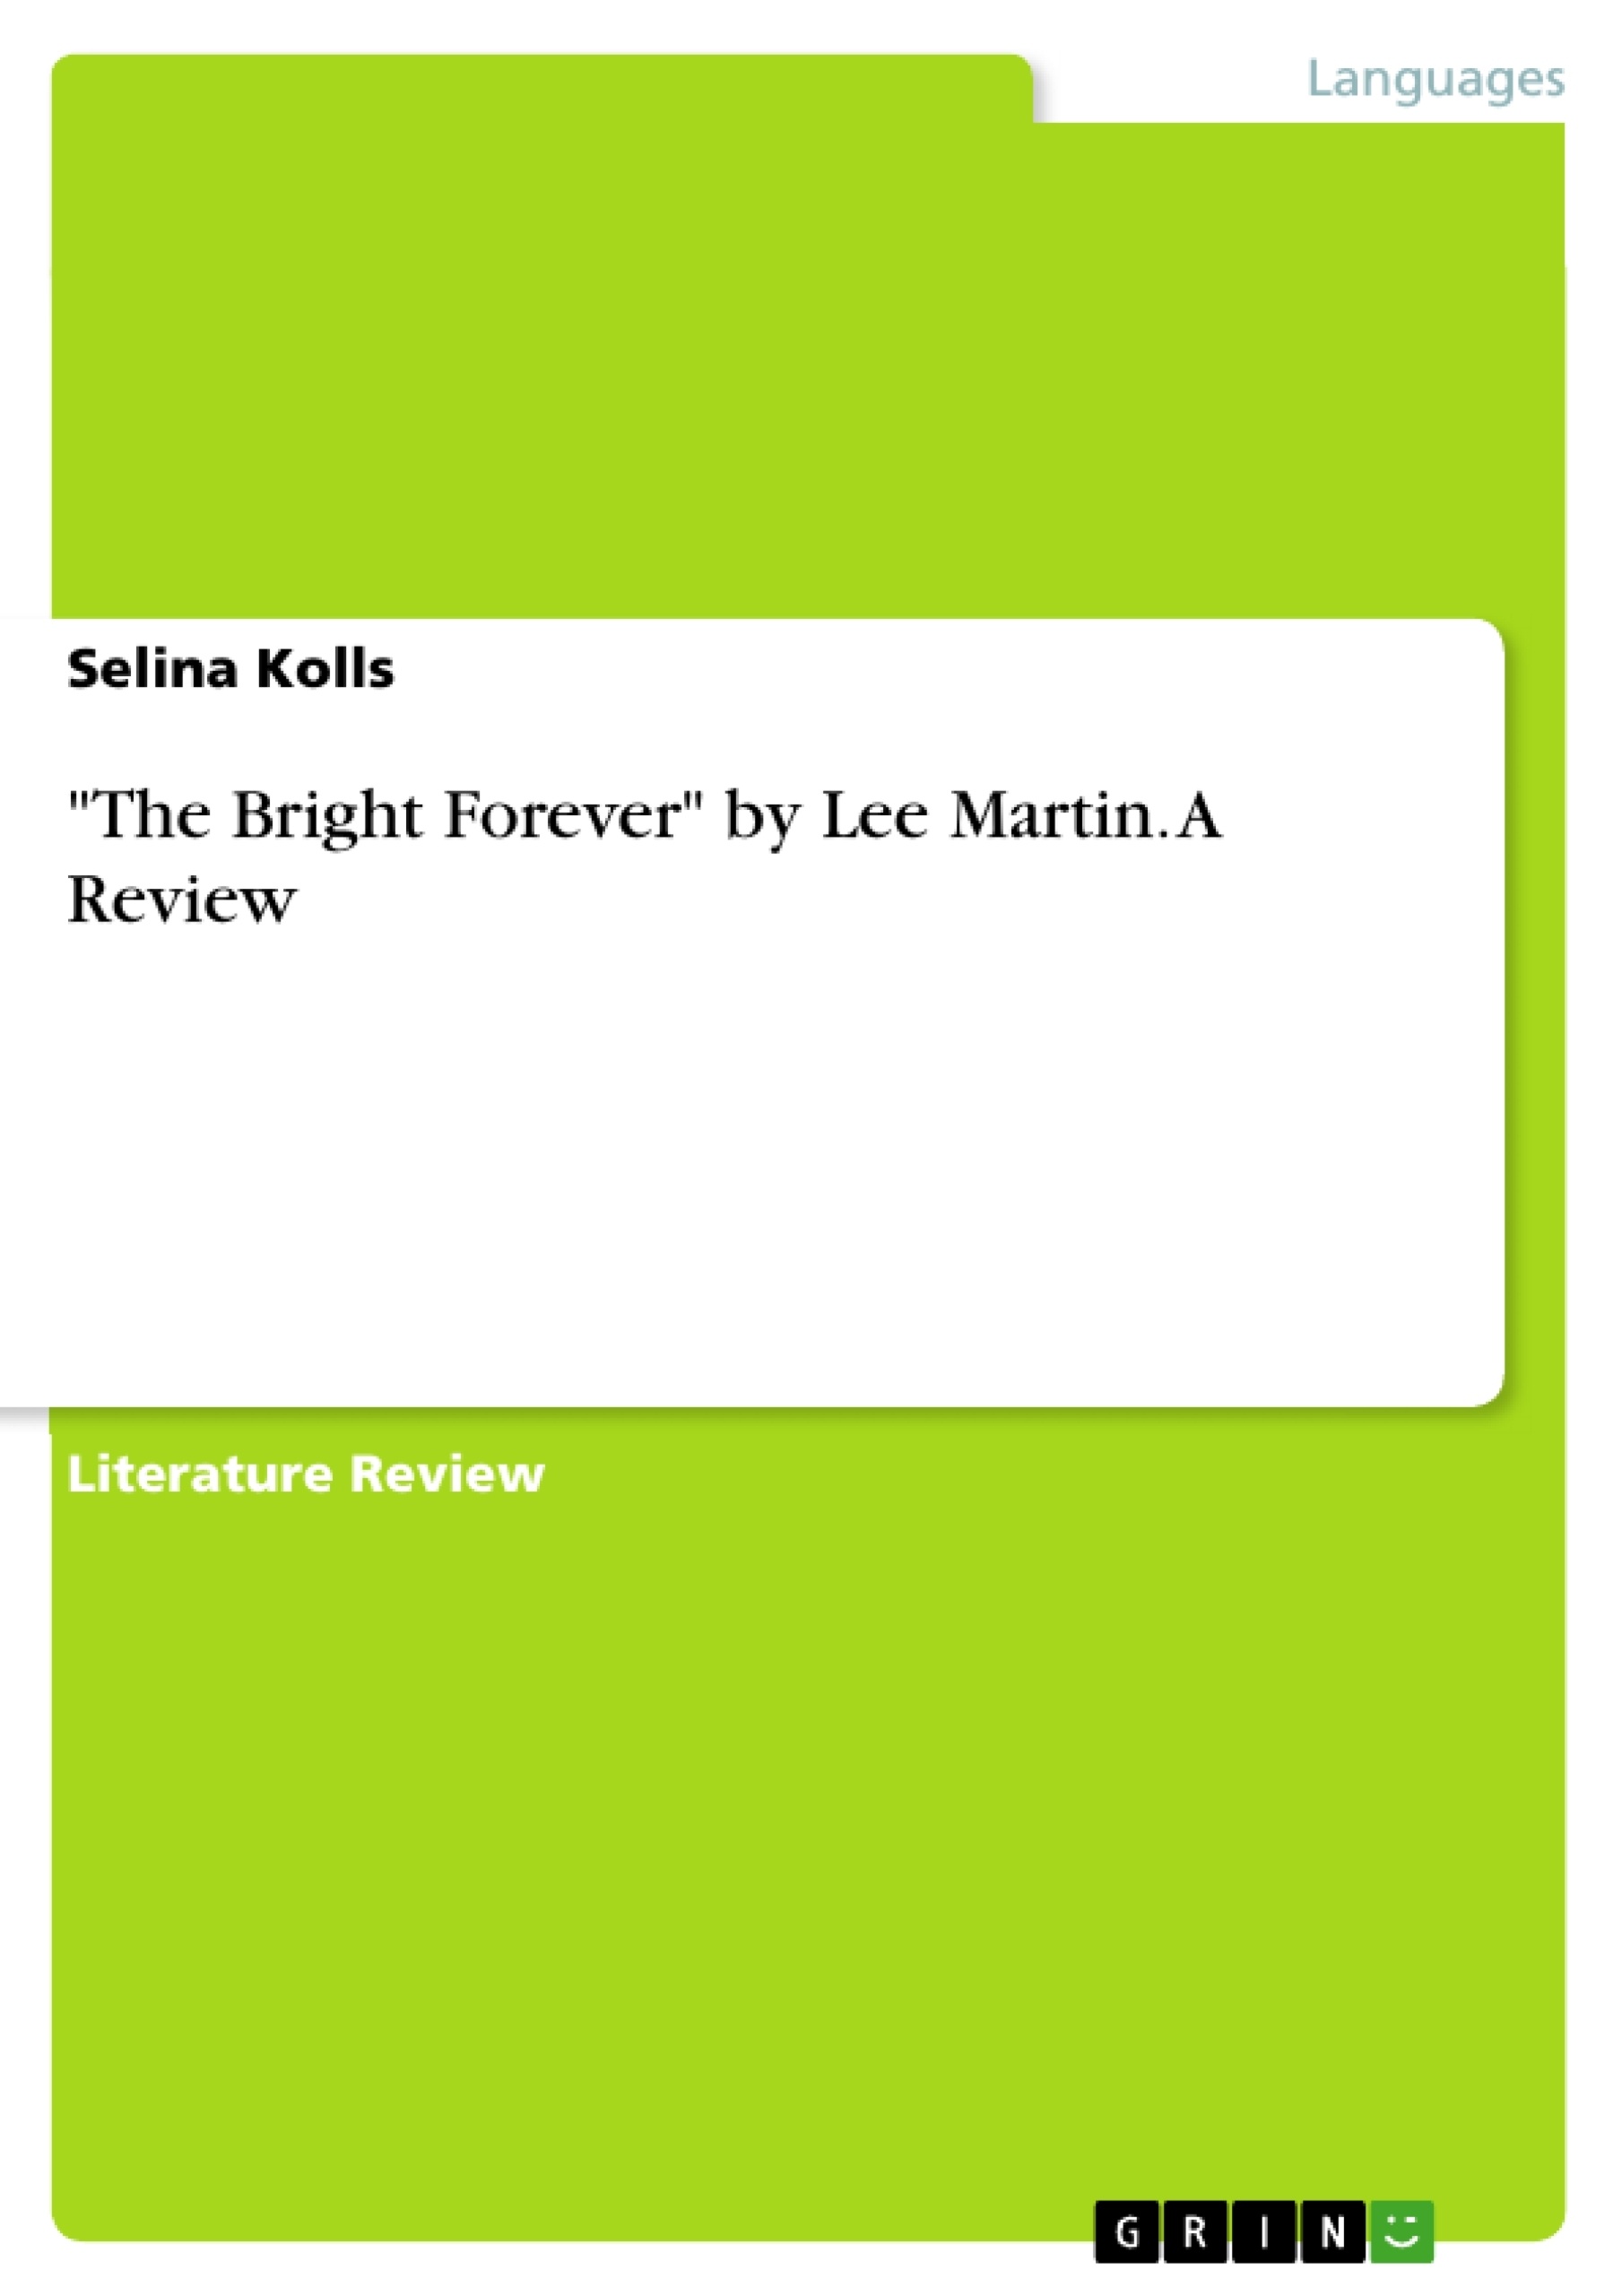 Título: "The Bright Forever" by Lee Martin. A Review